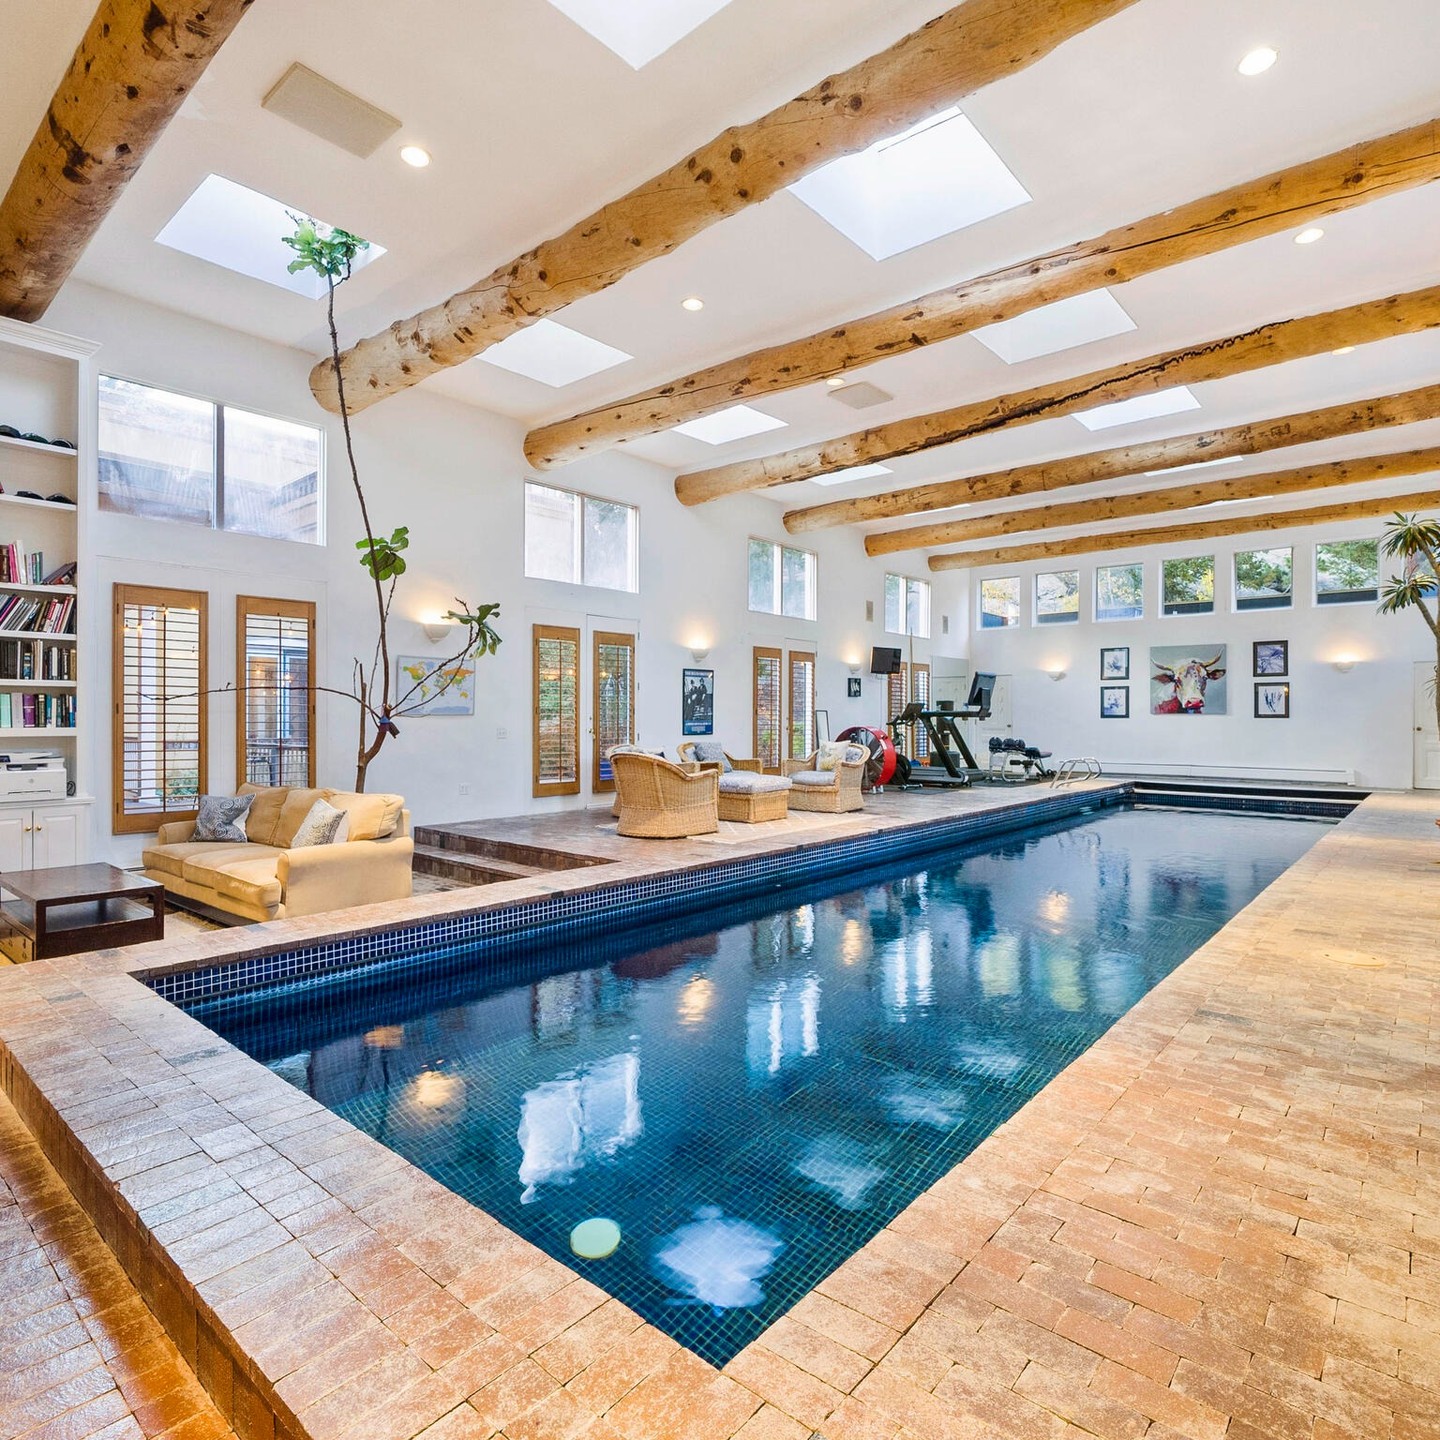 dark blue indoor swimming pool with natural wood beaming and lounge chairs. Photo via Instagram user @livsothebysrealty